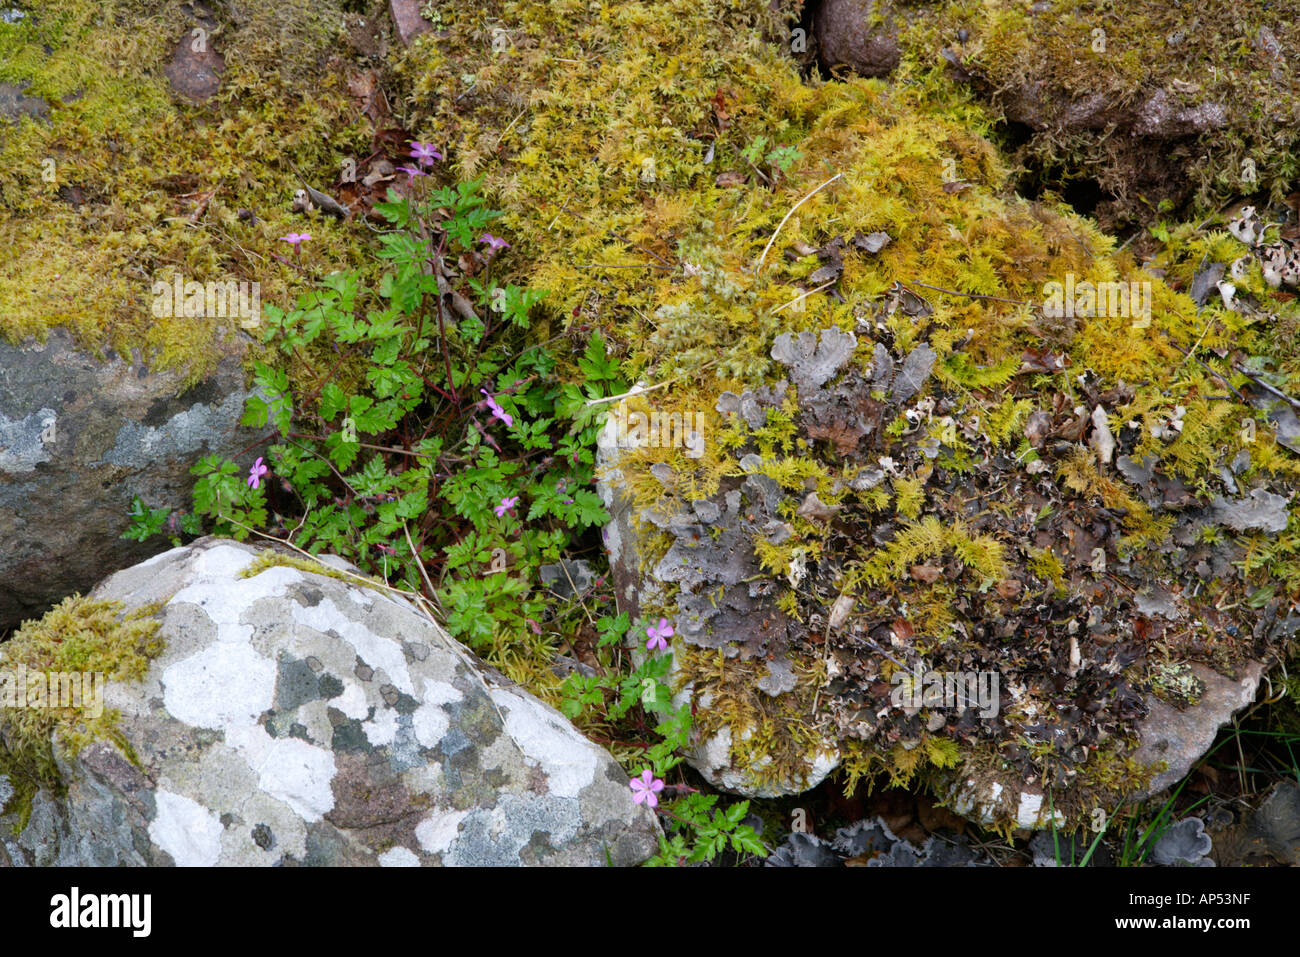 Small Flowered Cranes Bill And Sphagnum Moss Growing On Rocks Scotland UK Stock Photo